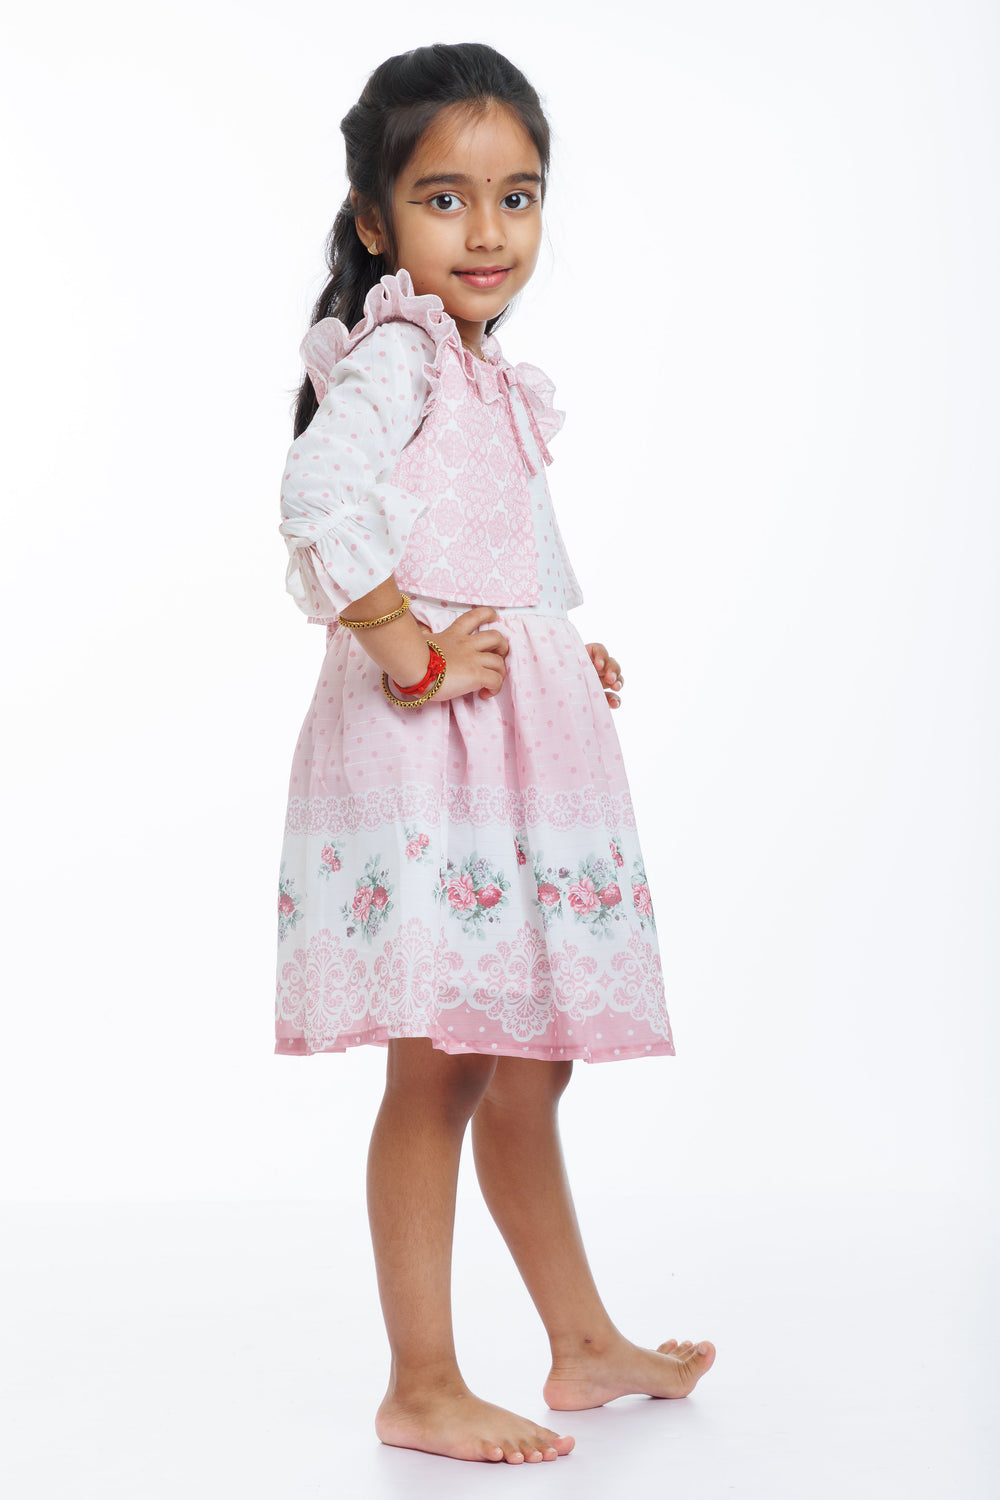 The Nesavu Girls Fancy Frock Girls Pink Fancy Frock with Lace Detailing and Matching Sheer Jacket Nesavu Buy Girls Pink Lace Fancy Frock with Sheer Jacket | Perfect Party Dress | The Nesavu